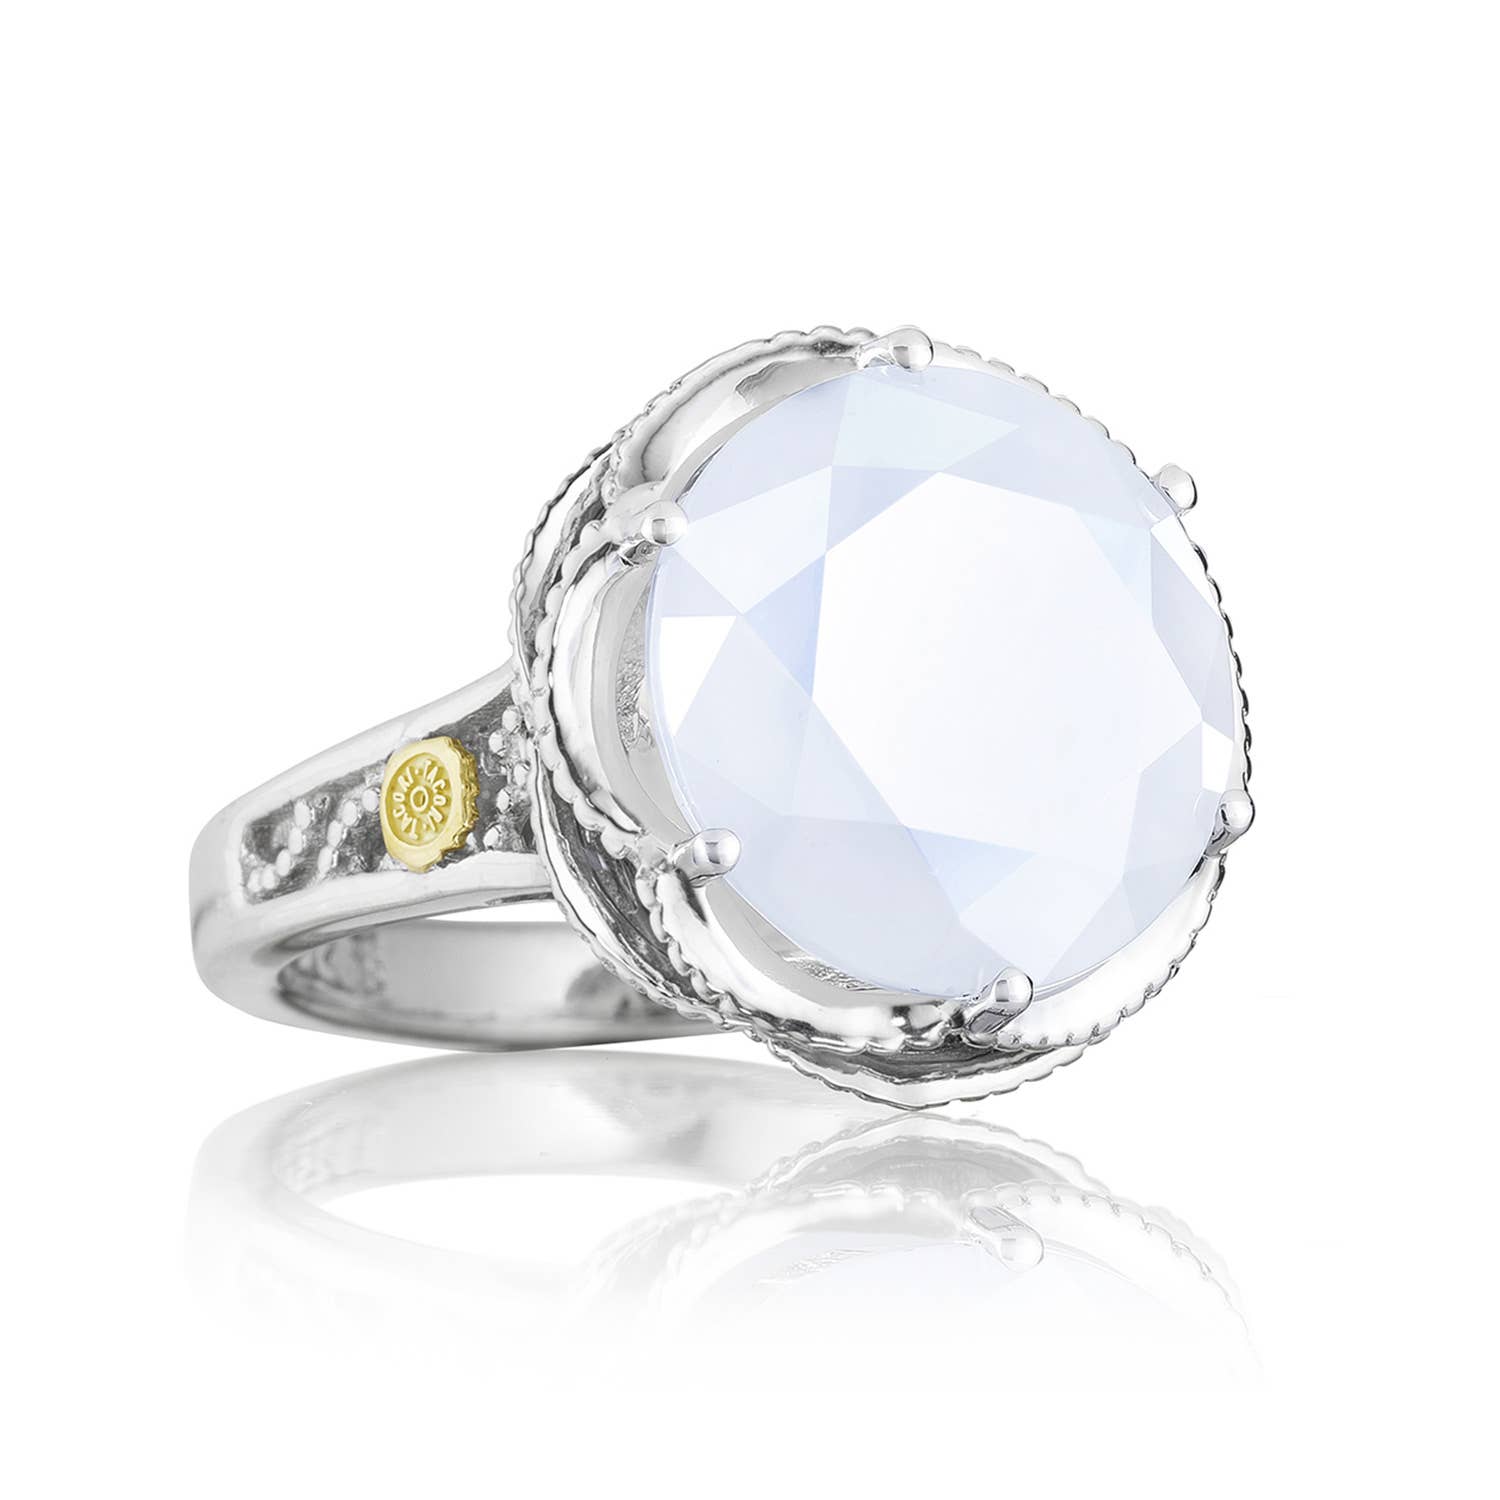 Crescent Gem Ring featuring Chalcedony